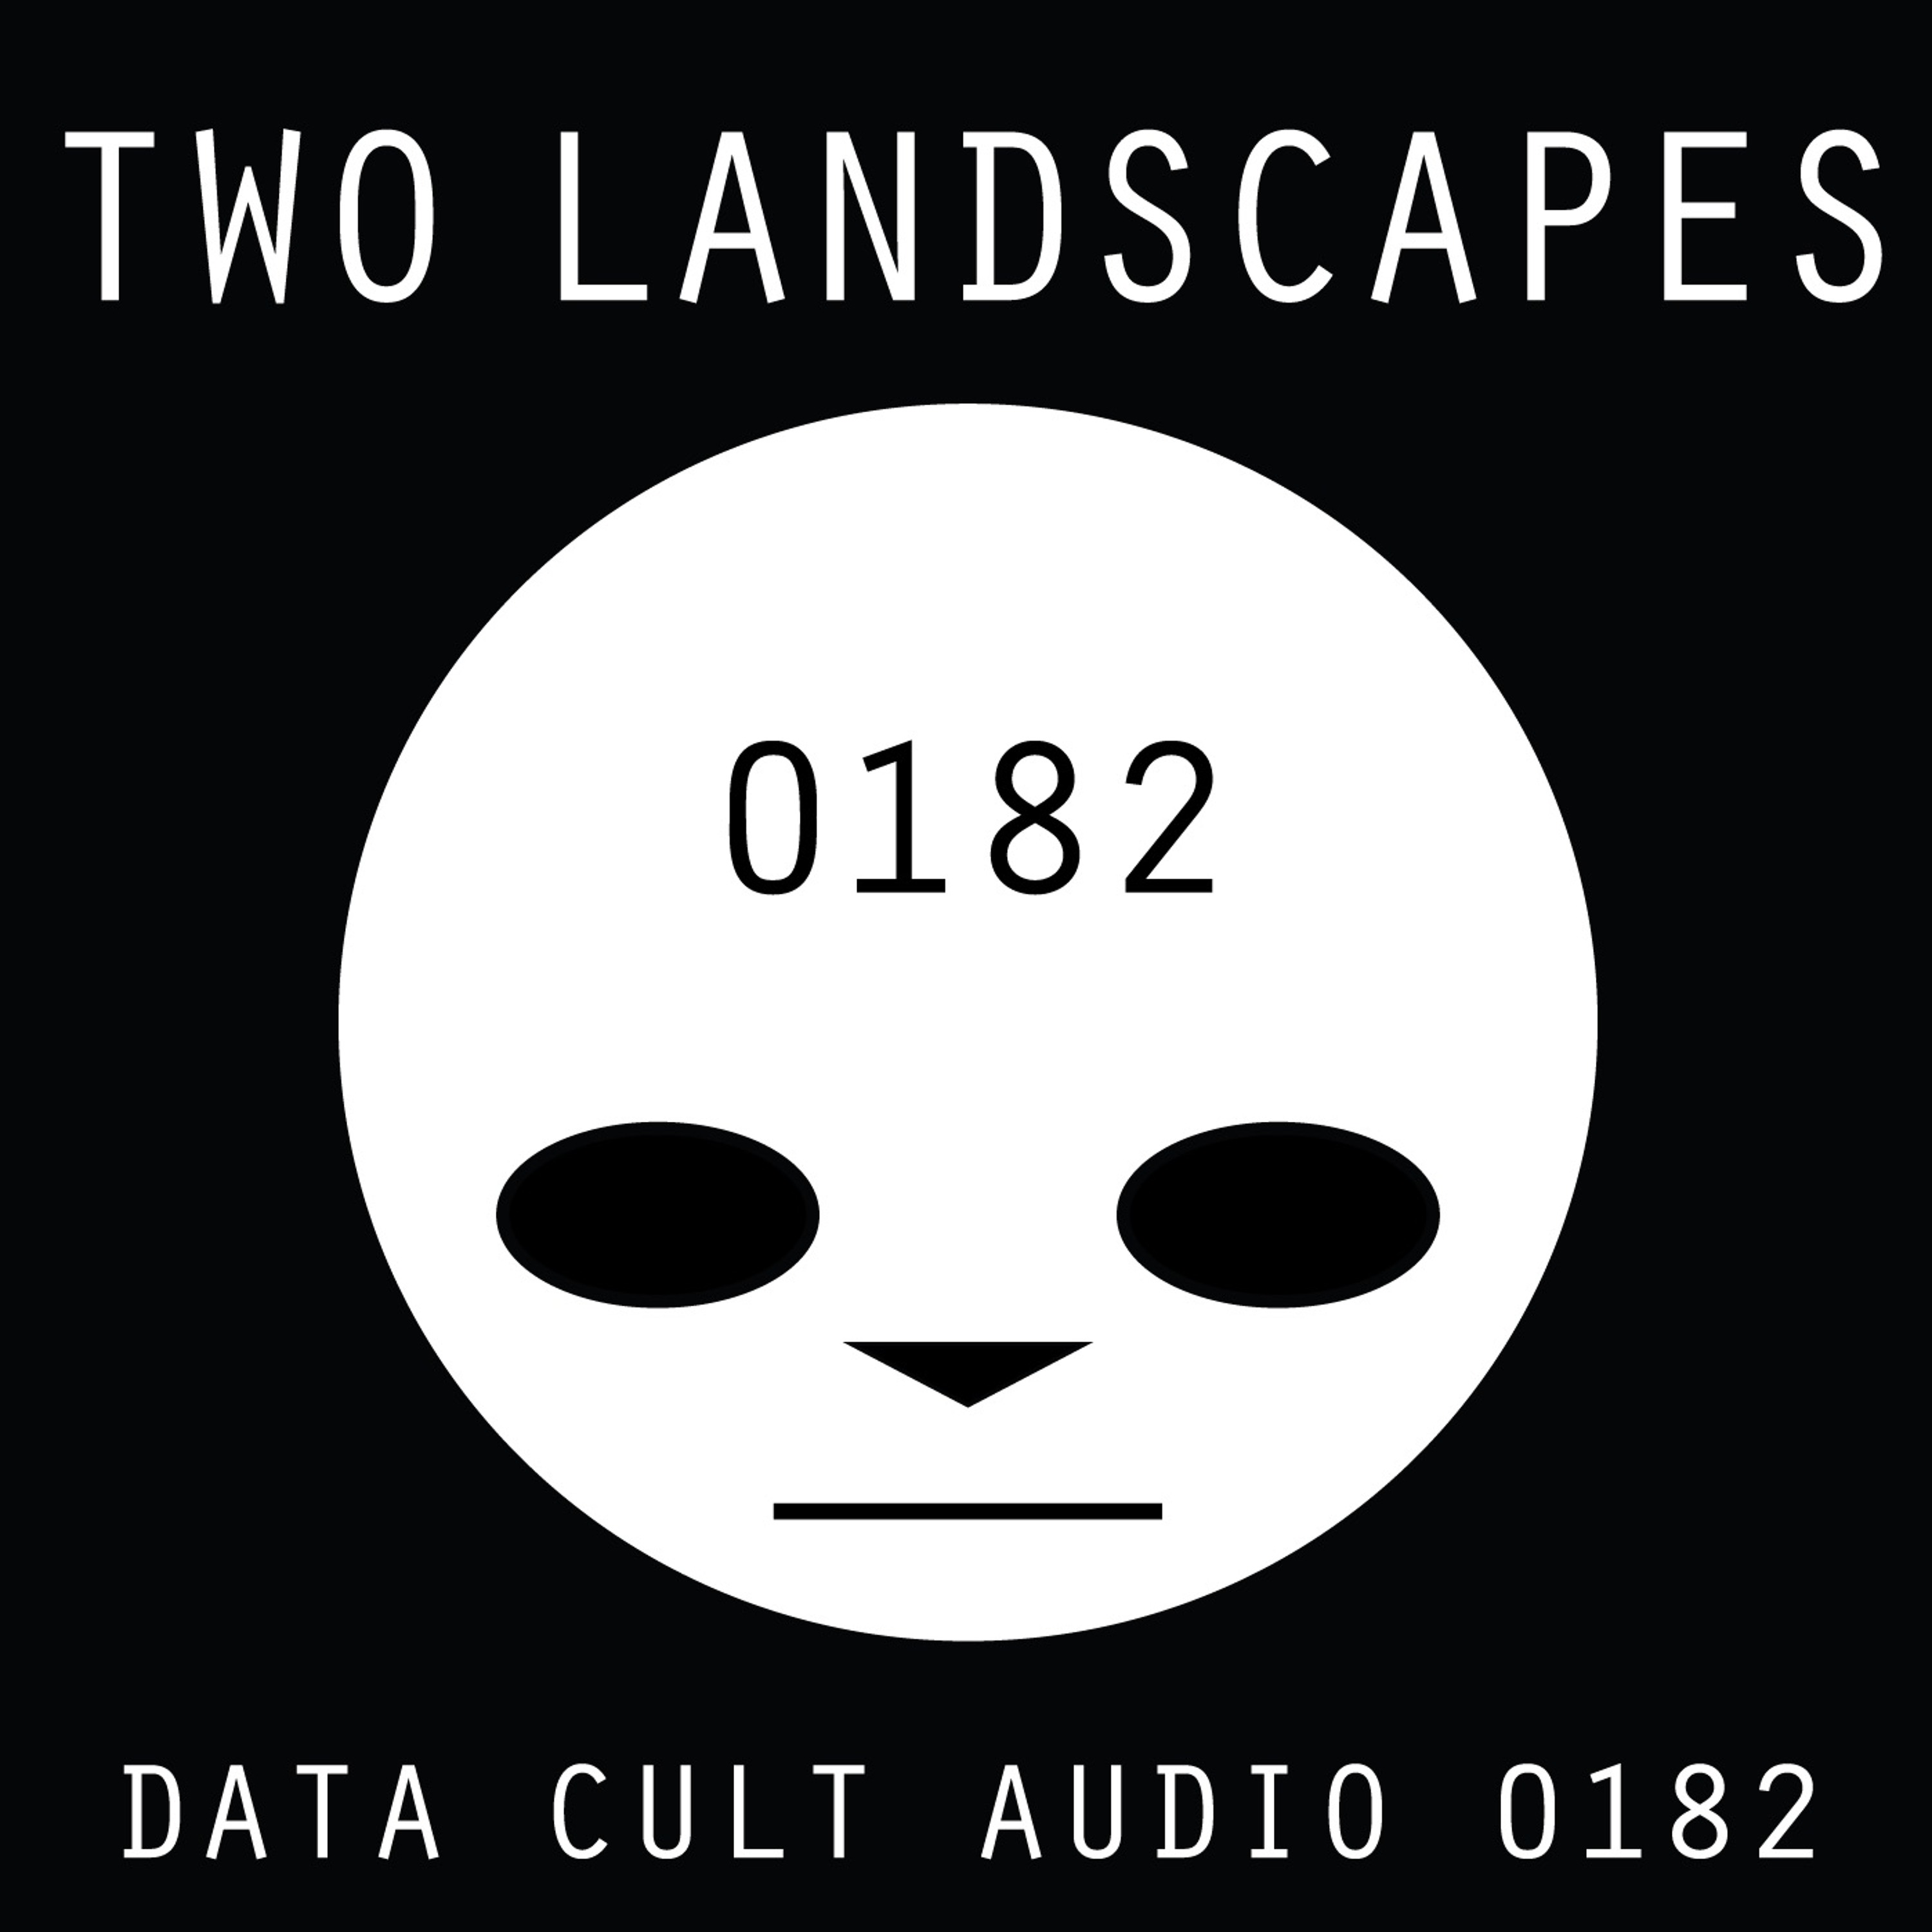 Data Cult Audio 0182 - Two Landscapes